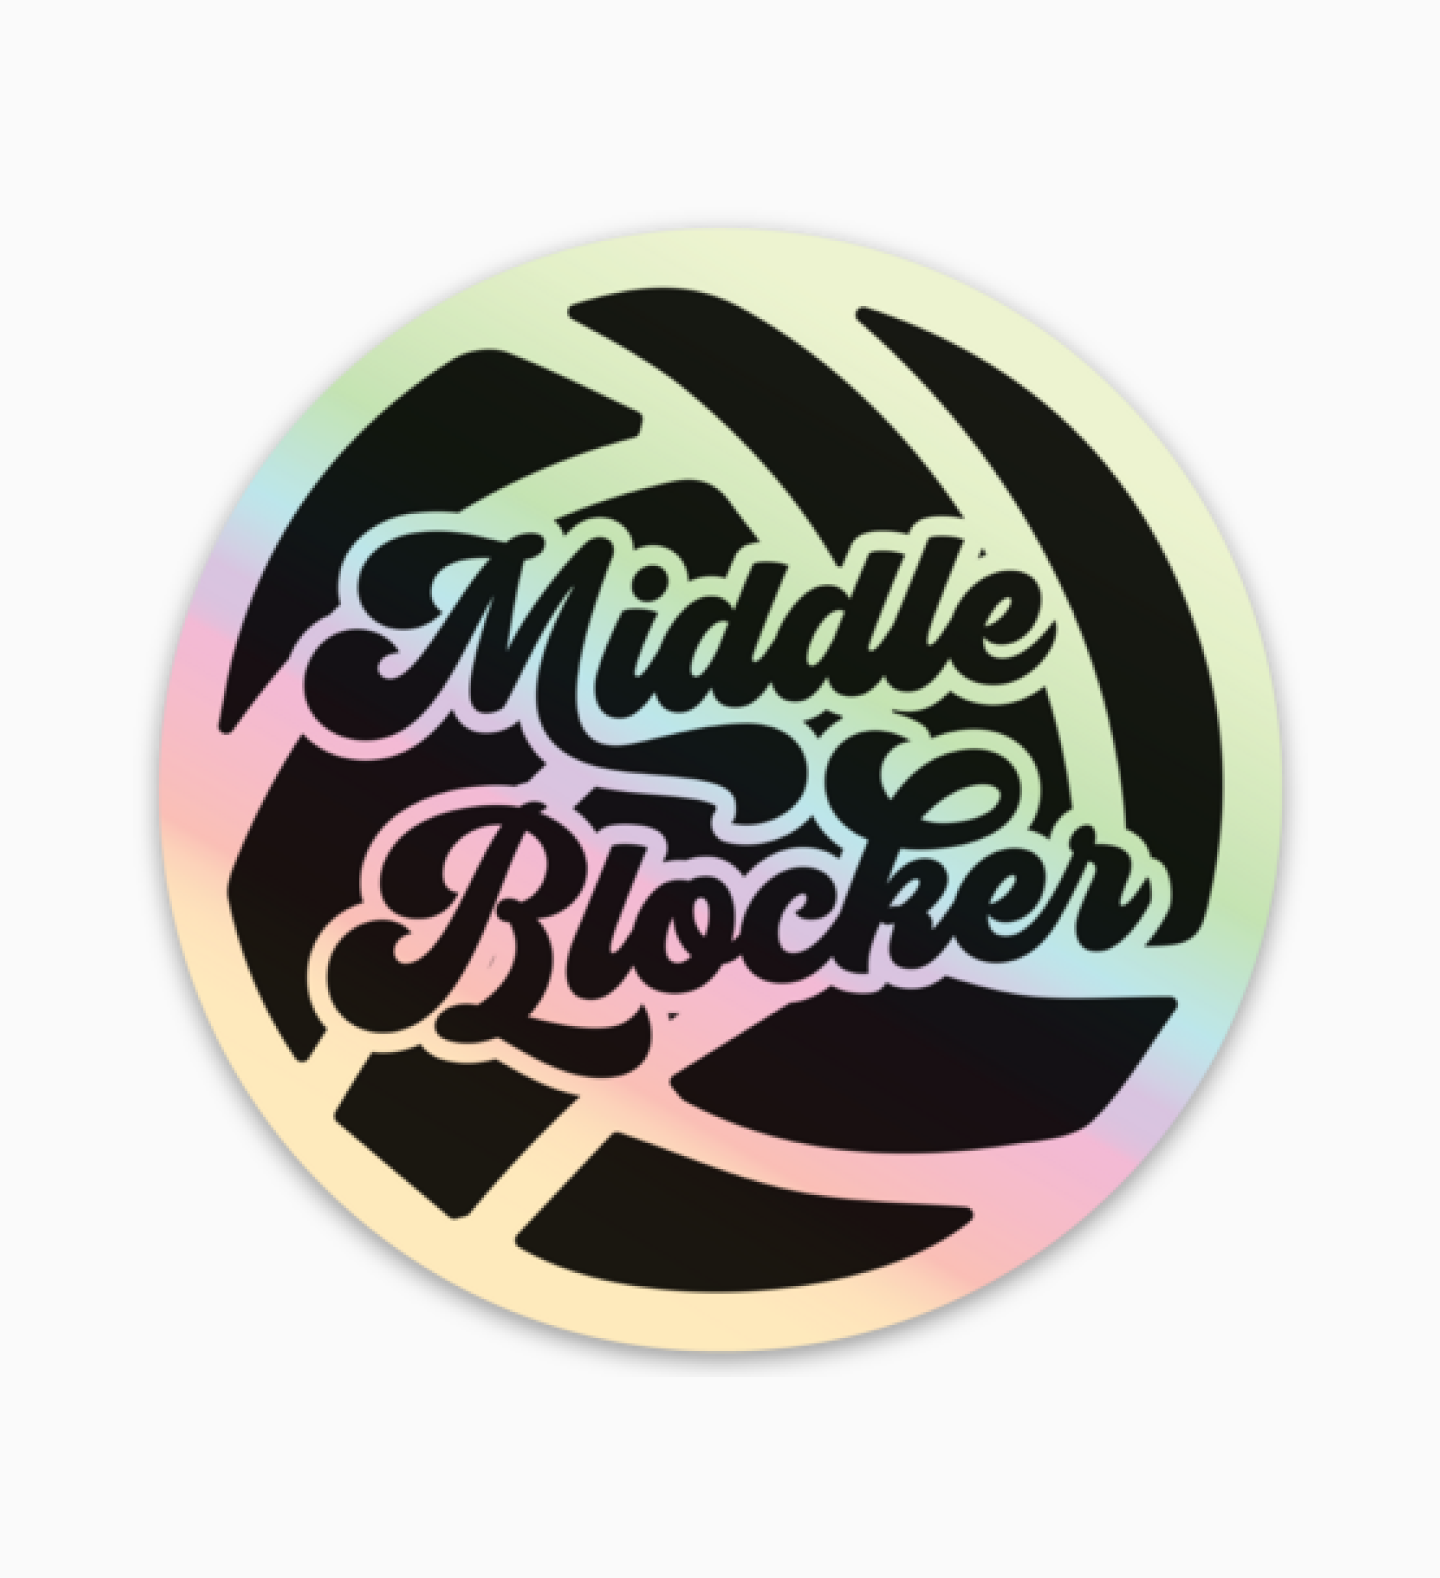 Middle Blocker - Volleyball Position Holographic Iridescent Sticker